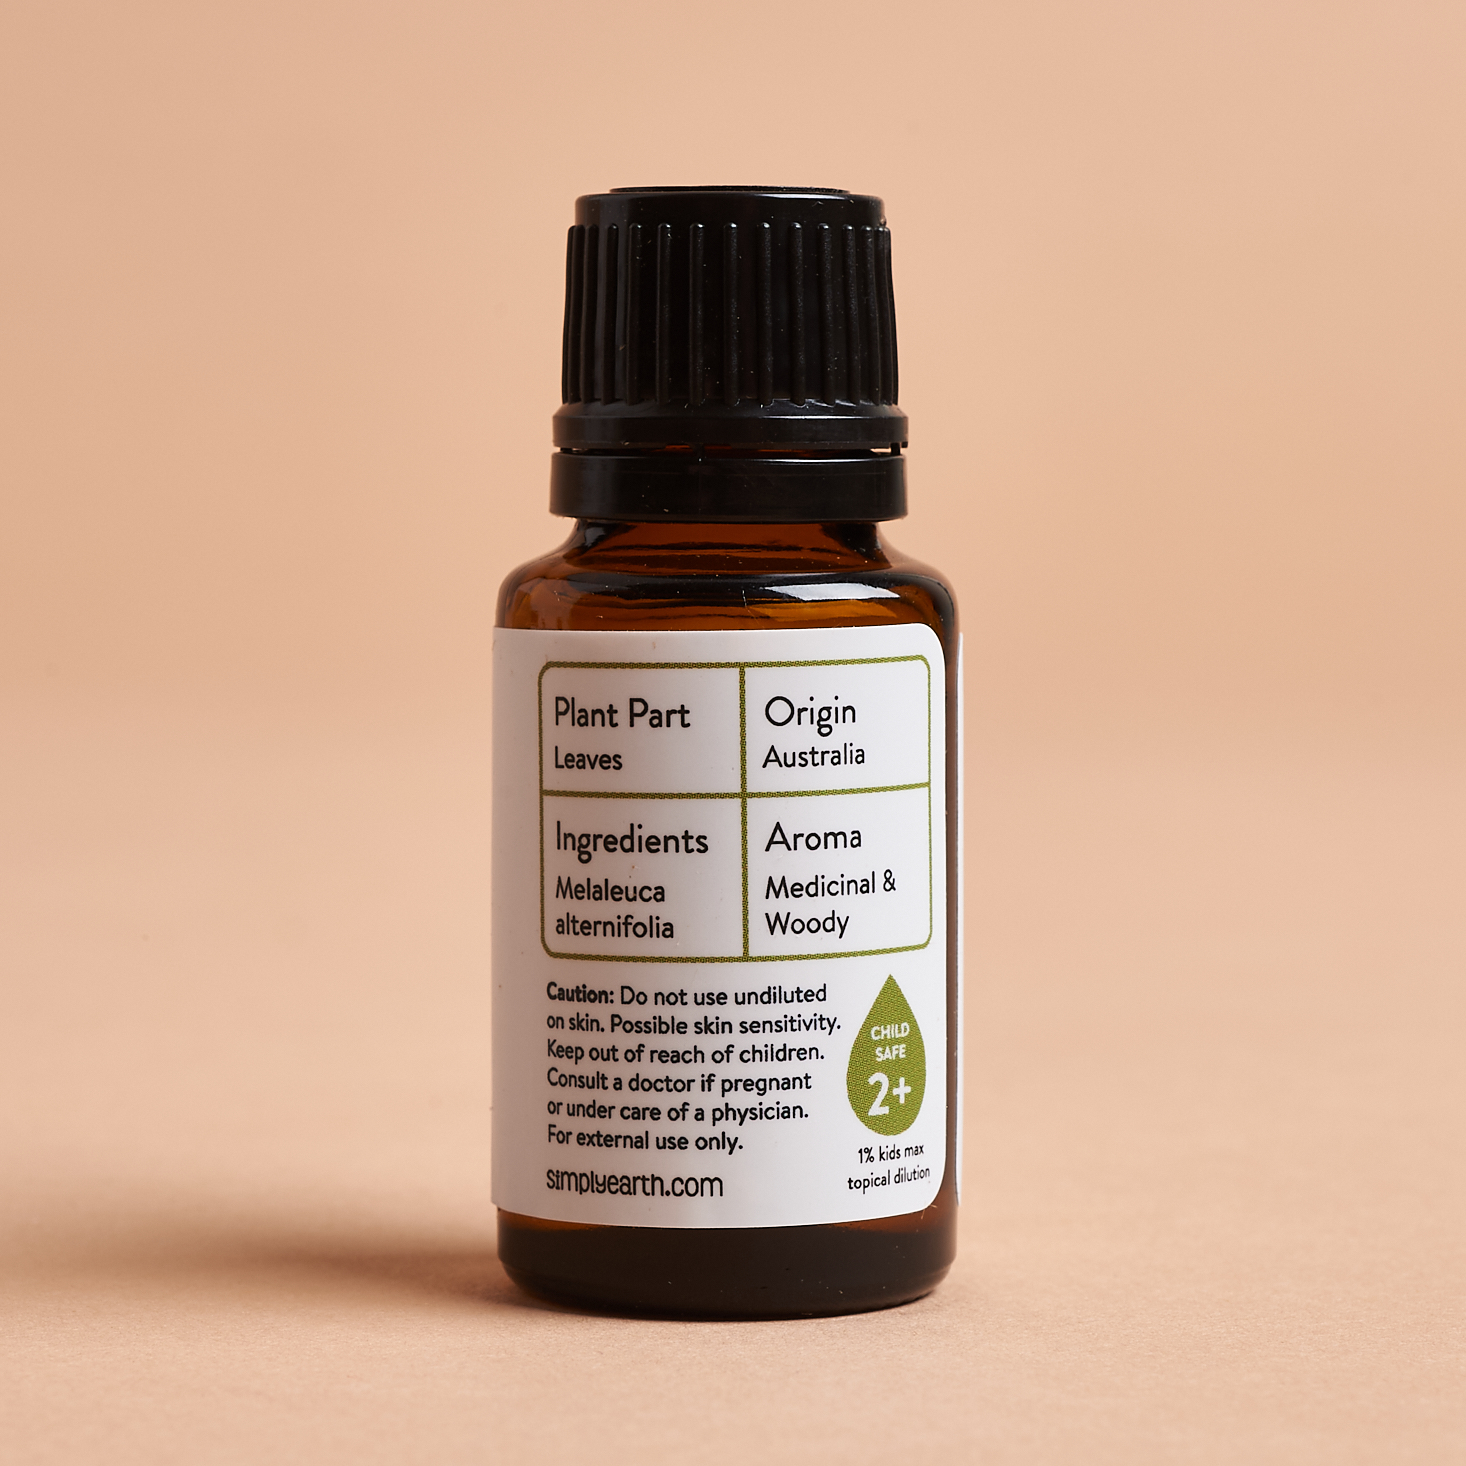 Simply Earth March 2021 tea tree essential oil label